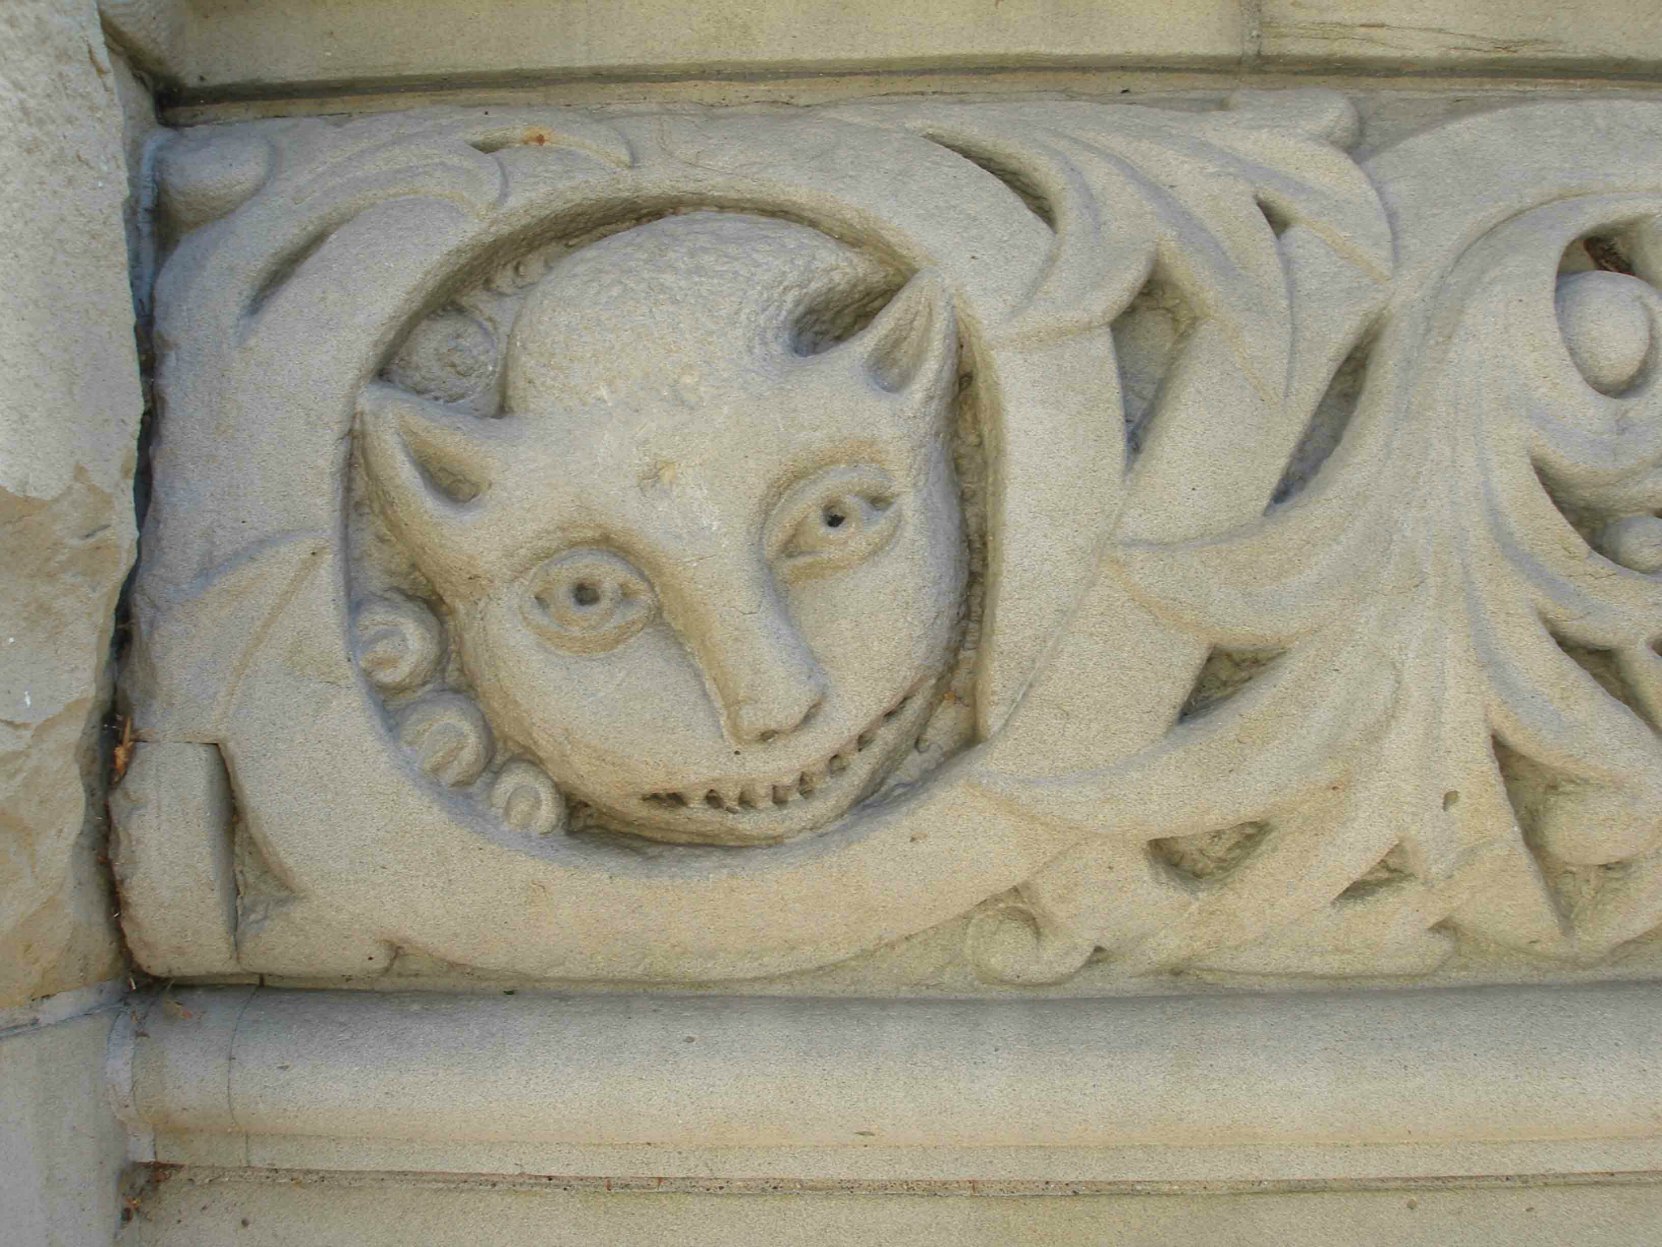 Exterior decorative detail, possibly representing the Cheshire Cat, on the stair railing of the Yates Street entrance of the former Carnegie Library, 794 Yates Street.